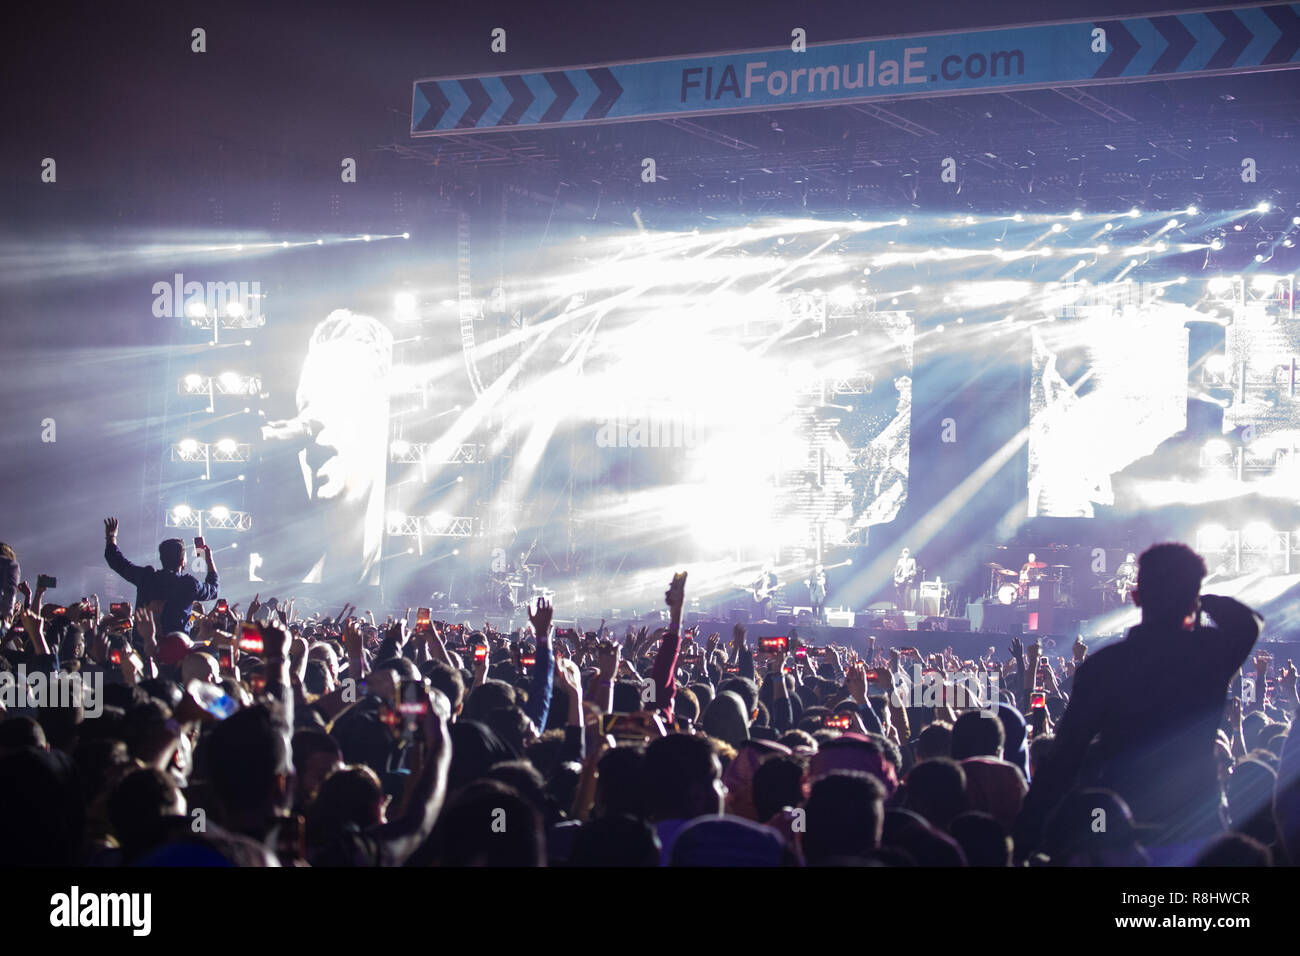 Ad Diriyah, Saudi Arabia. 15th December 2018. Pop-rock band One Republic plays to an historic open-air crowd at the season-opening Formula E racing event in Saudi Arabia. Credit: Stephen Lioy/Alamy Live News Stock Photo